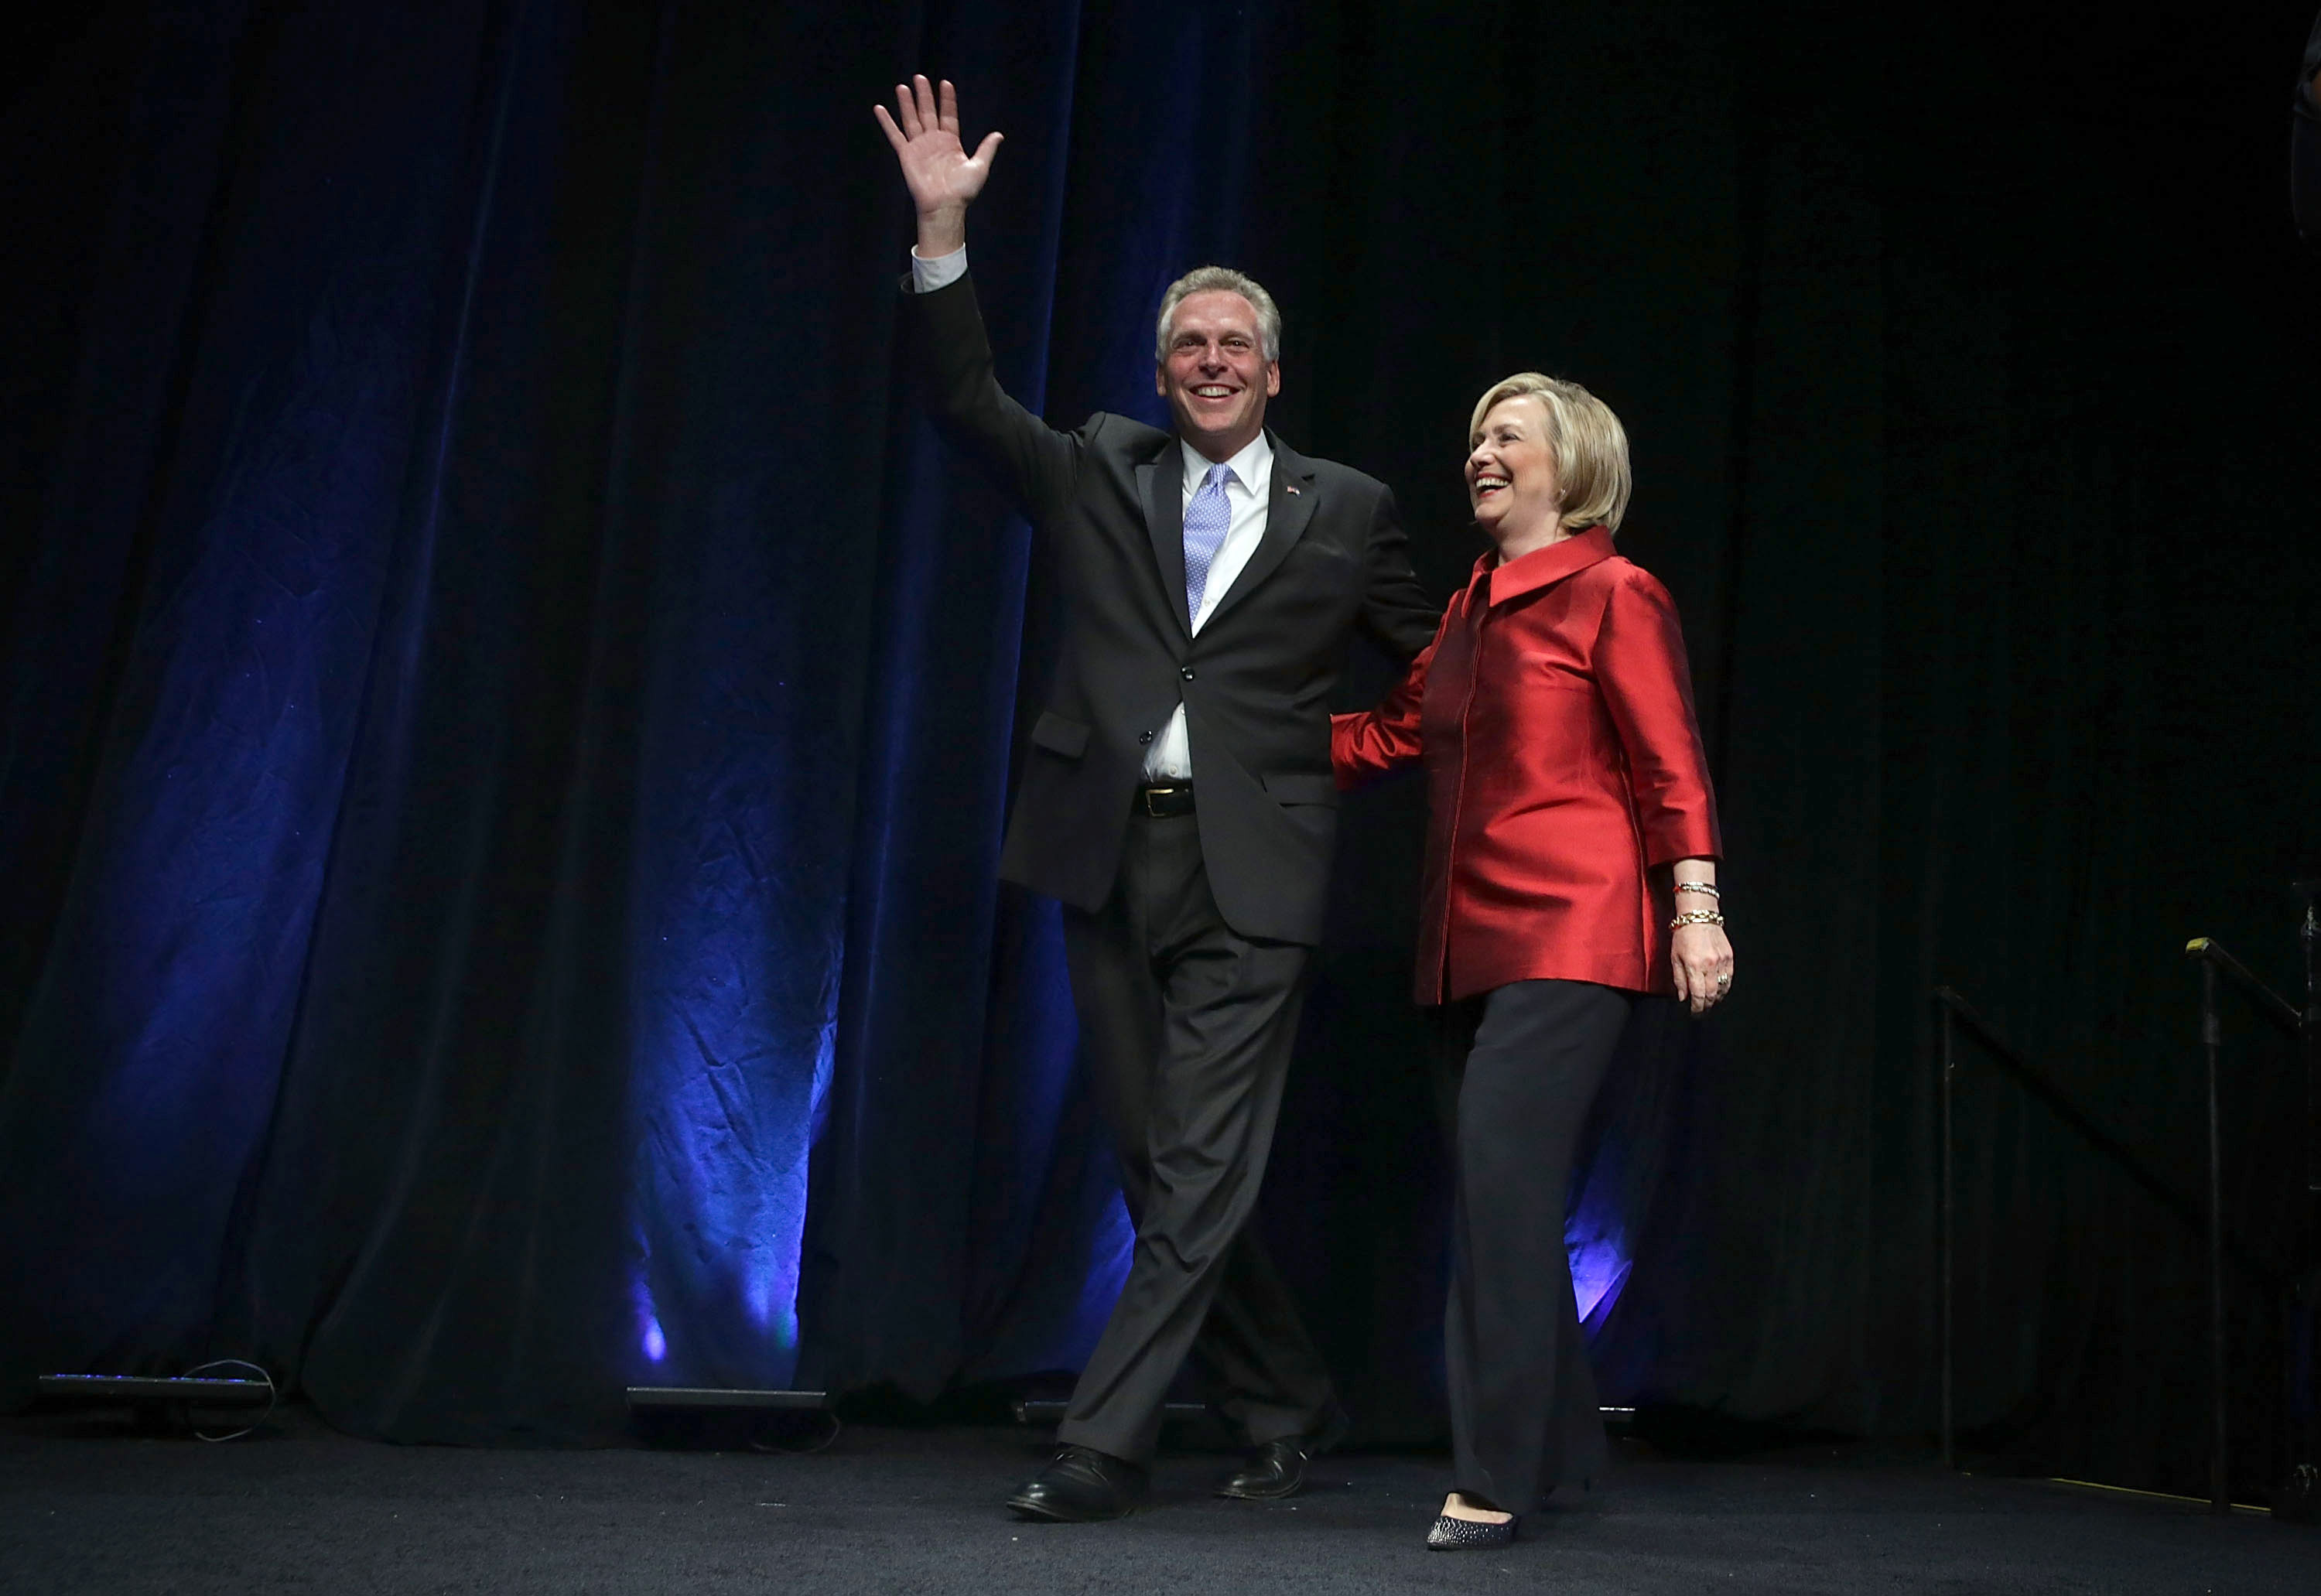 Democratic U.S. presidential hopeful and former U.S. Secretary of the State Hillary Clinton comes on the stage with Virginia Governor Terry McAuliffe during the Democratic Party of Virginia Jefferson-Jackson dinner June 26, 2015 at George Mason University's Patriot Center in Fairfax, Virginia. (Alex Wong—Getty Images)